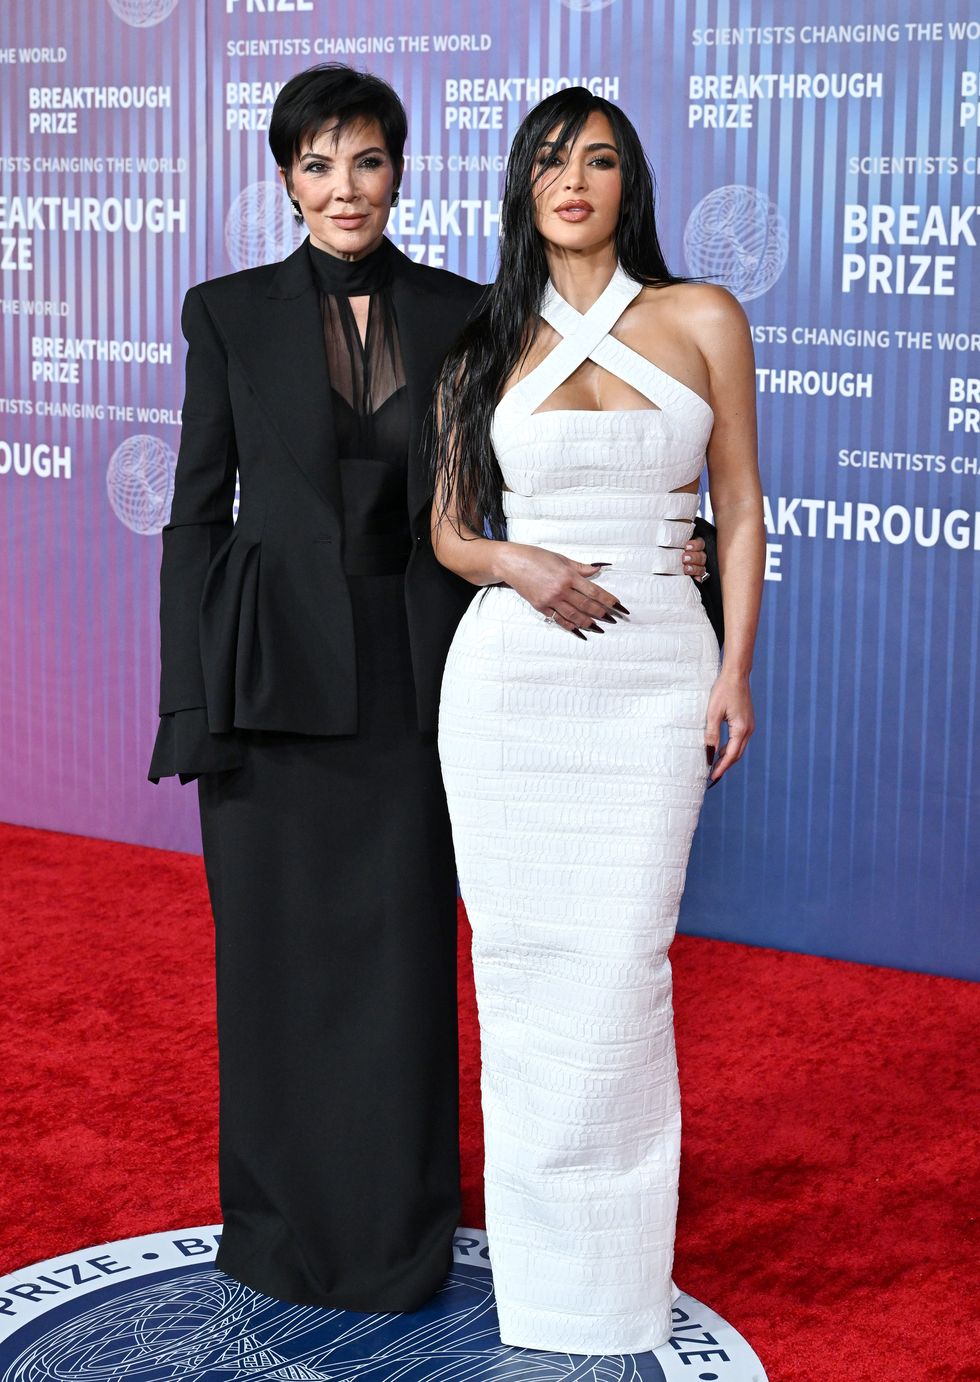 los angeles, california april 13 kris jenner and kim kardashian attend the 10th annual breakthrough prize ceremony at academy museum of motion pictures on april 13, 2024 in los angeles, california photo by axellebauer griffinfilmmagic